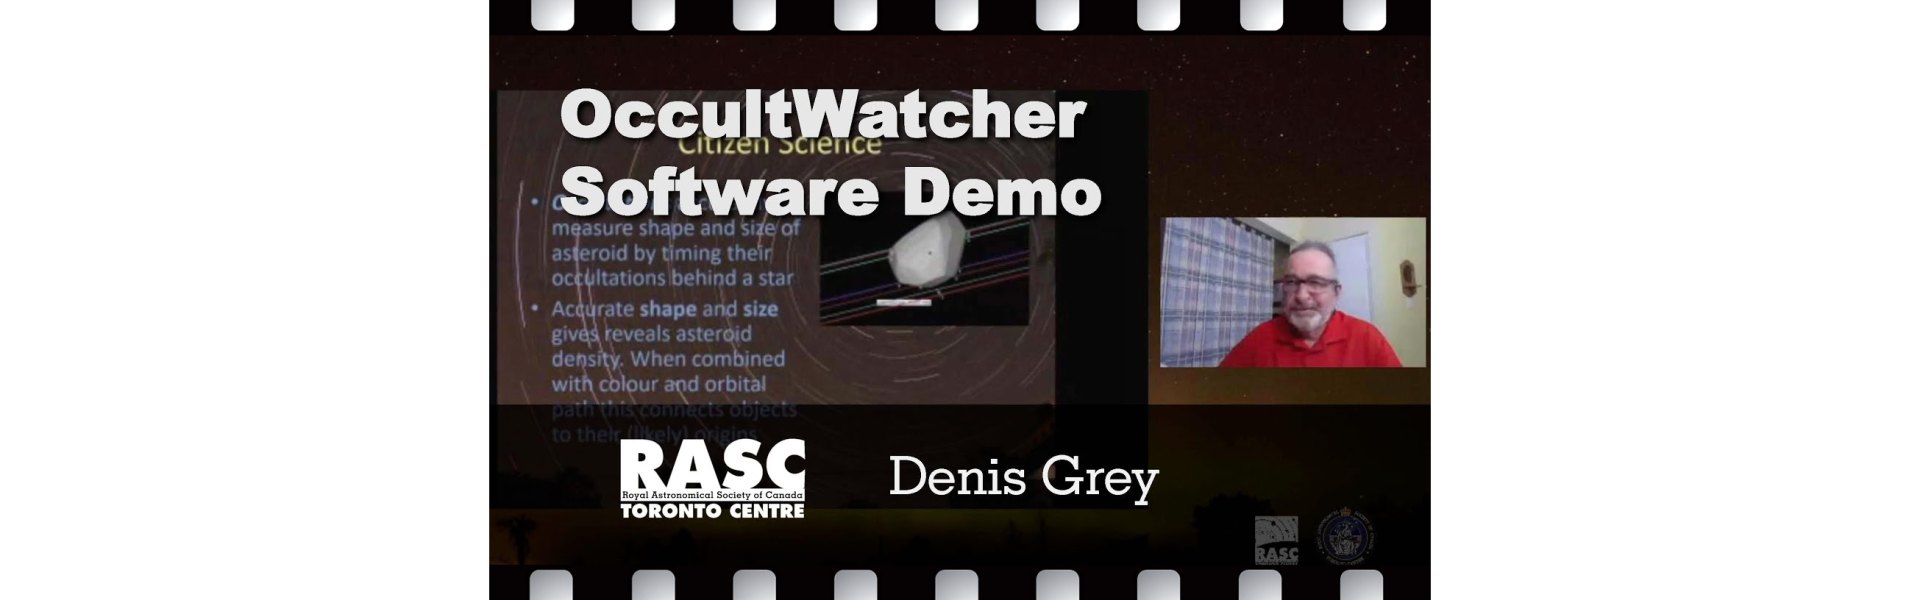 OccultWatcher Software Demonstration by Denis Grey